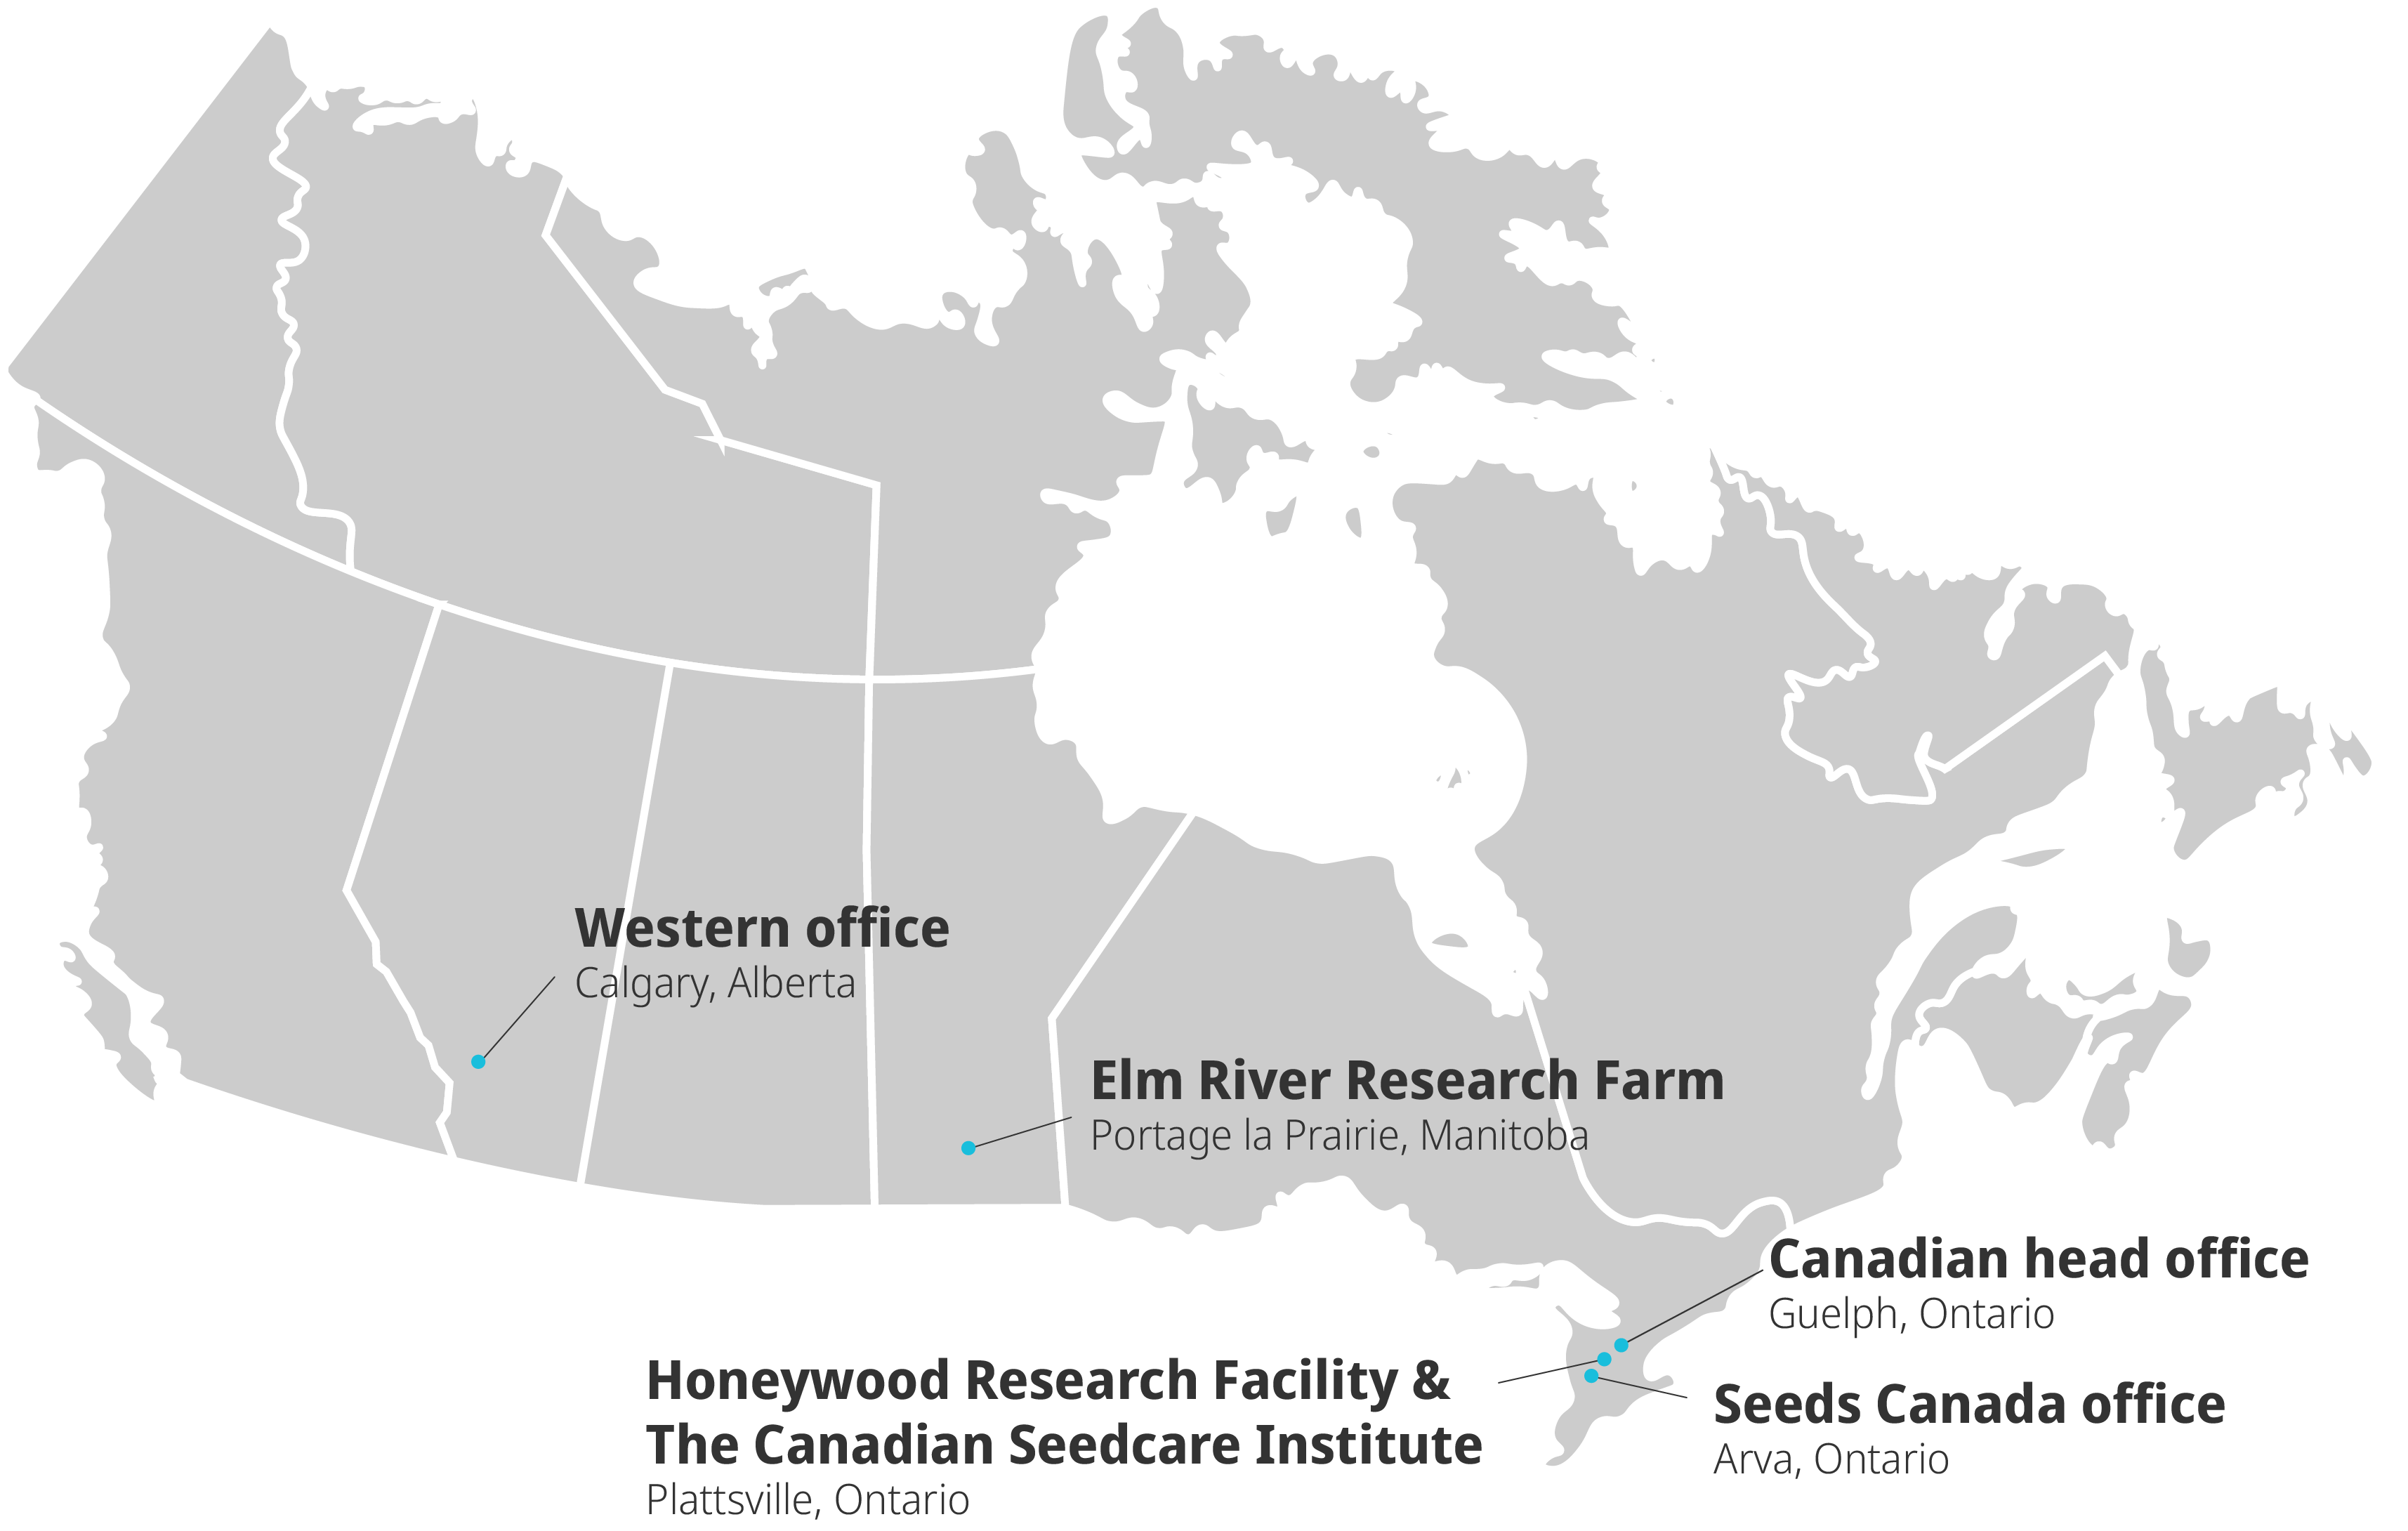 Syngenta locations identified on a map of Canada